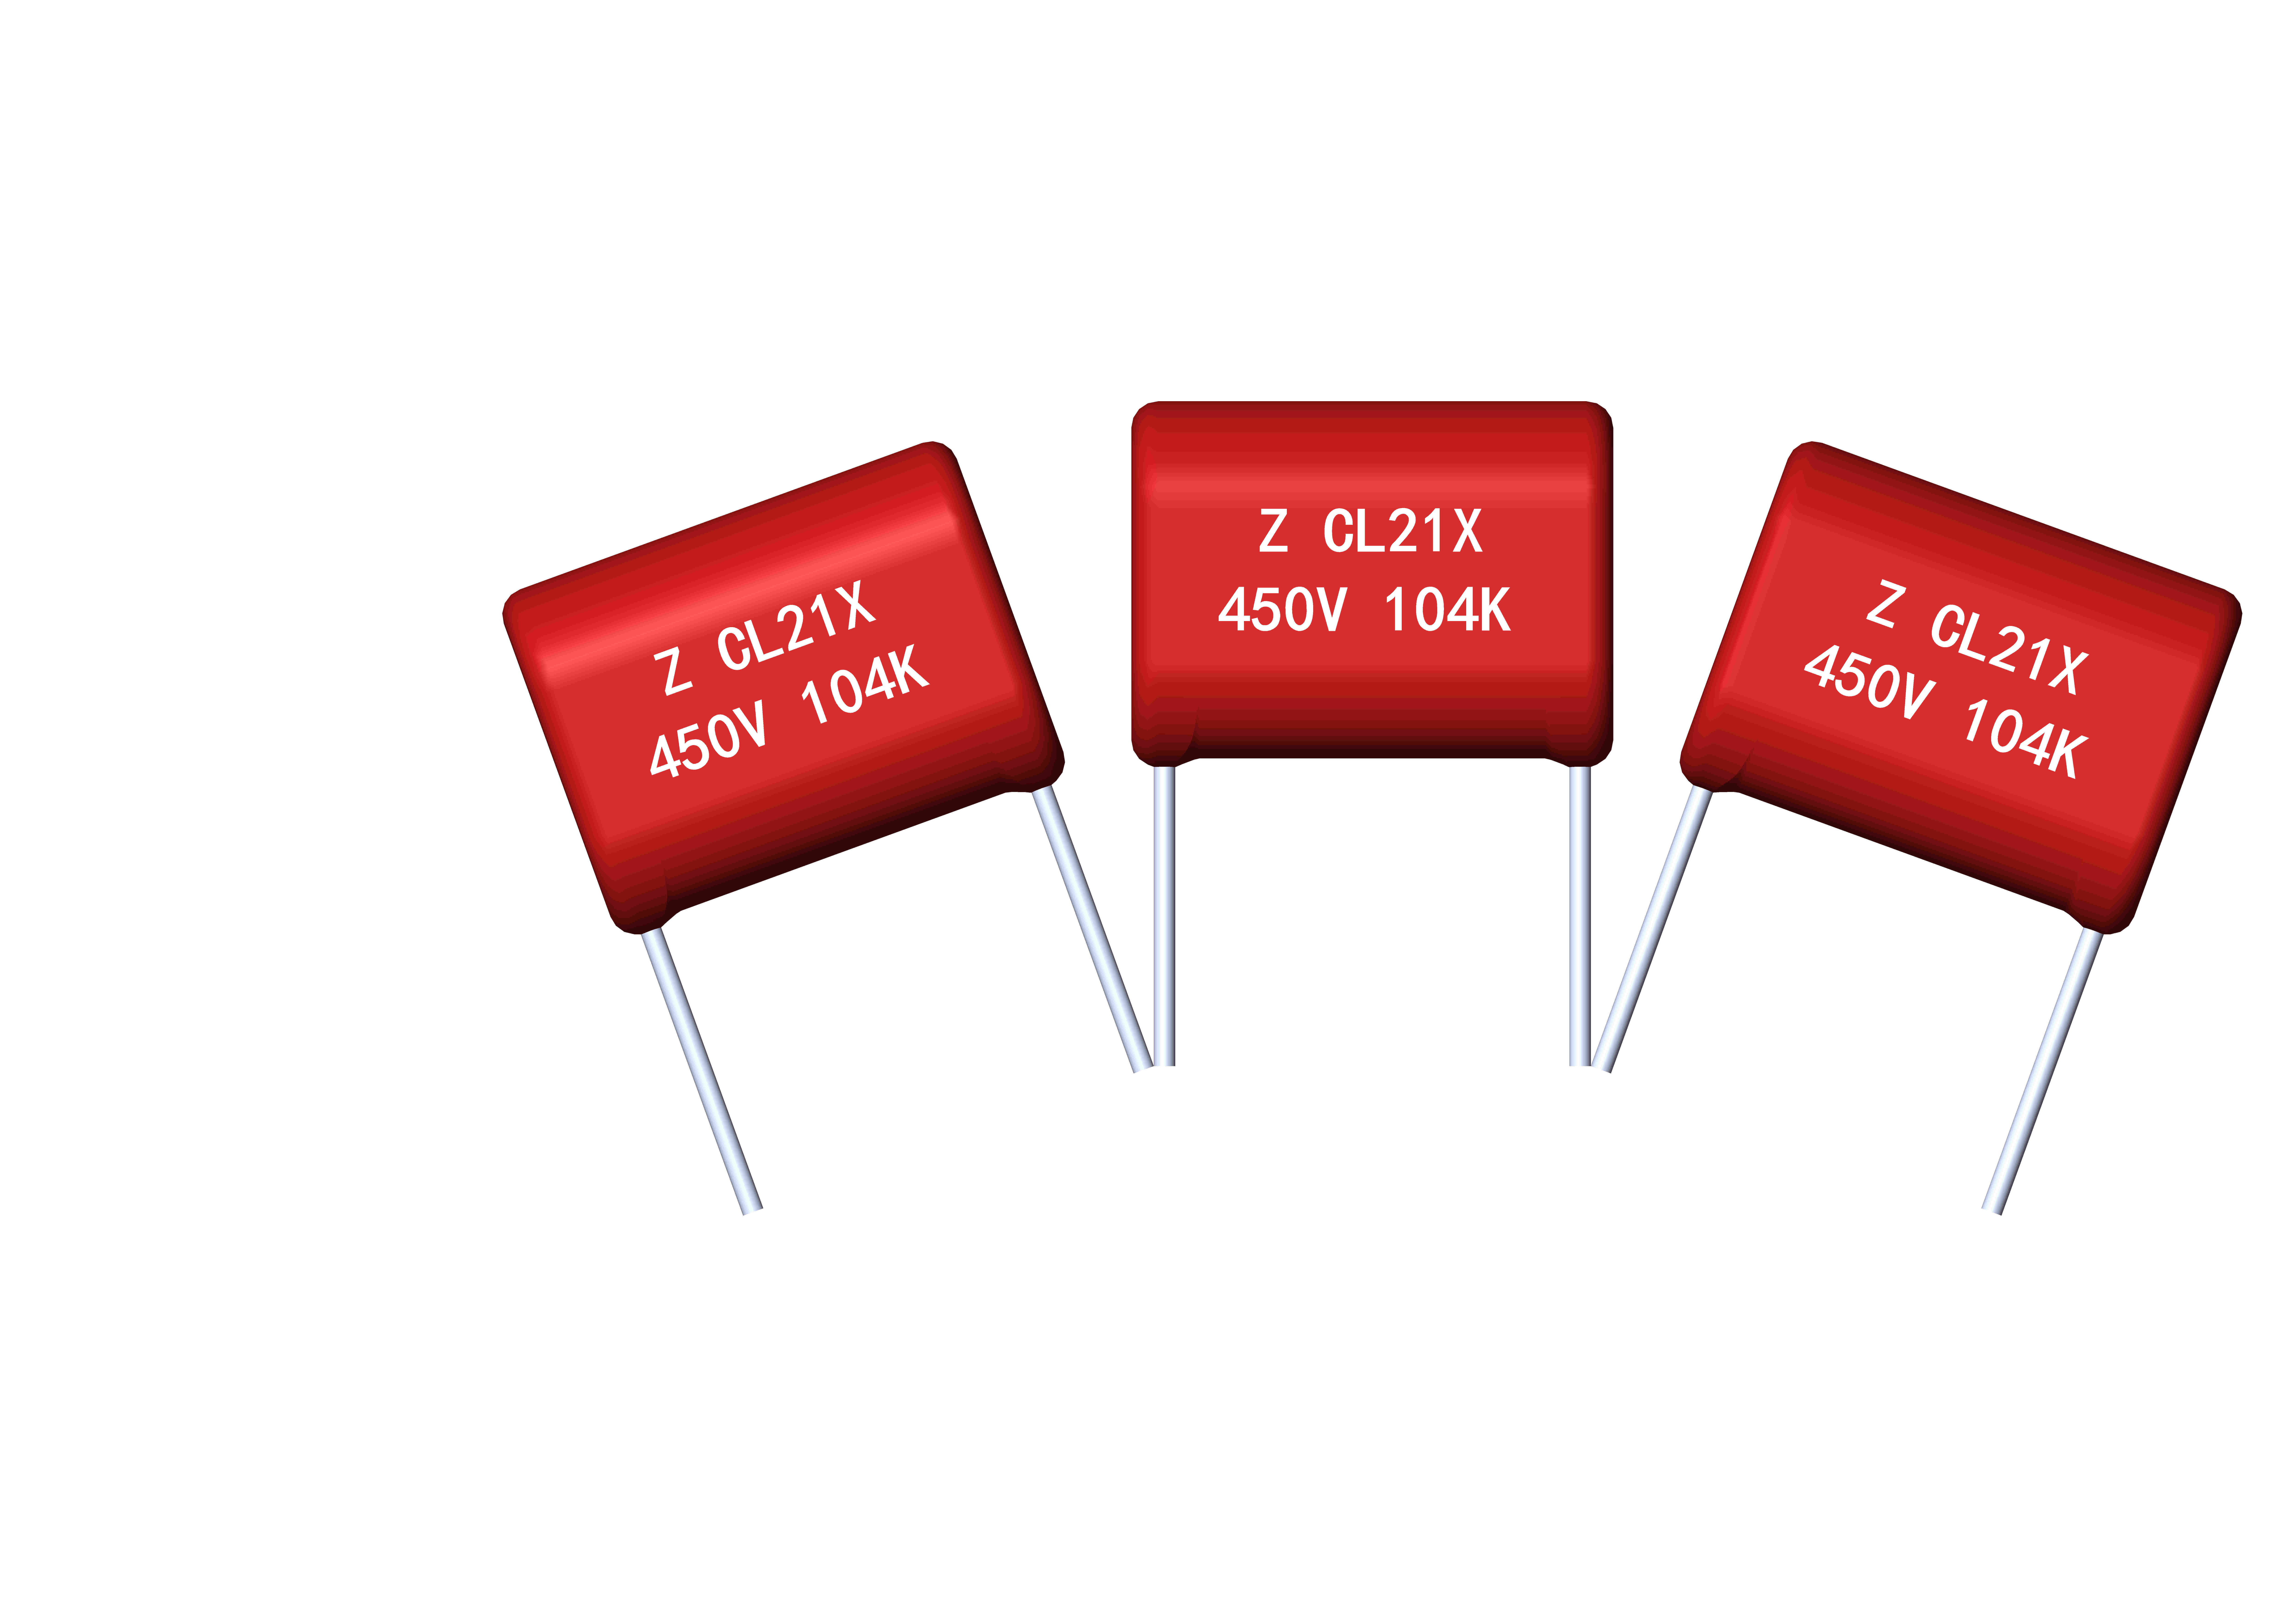 CL21X_Metallized polyester film capacitor (Dipped,Miniature version)